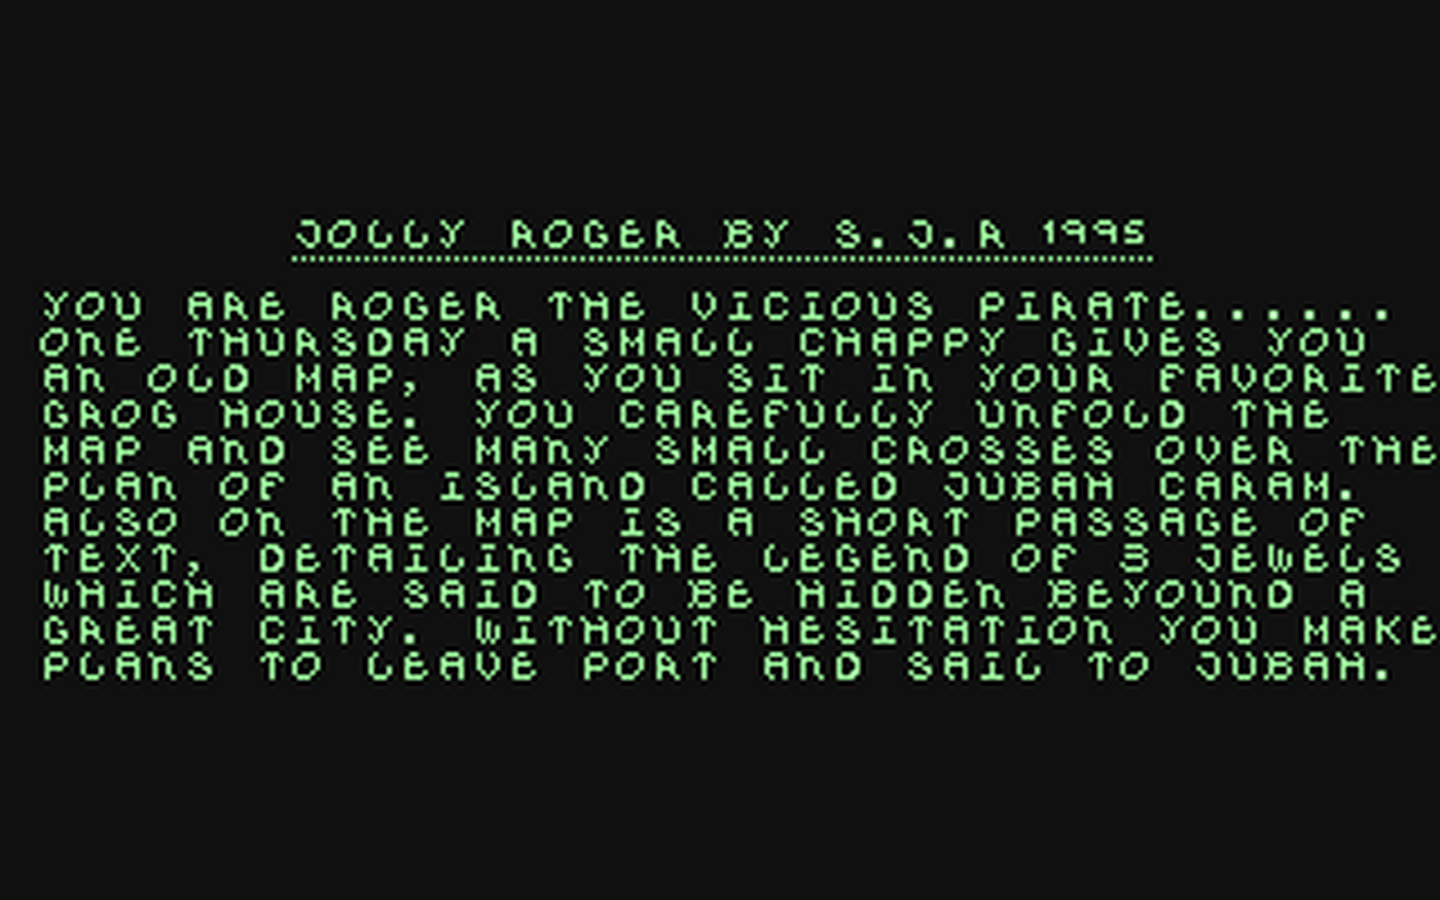 C64 GameBase Jolly_Roger (Created_with_SEUCK) 1995